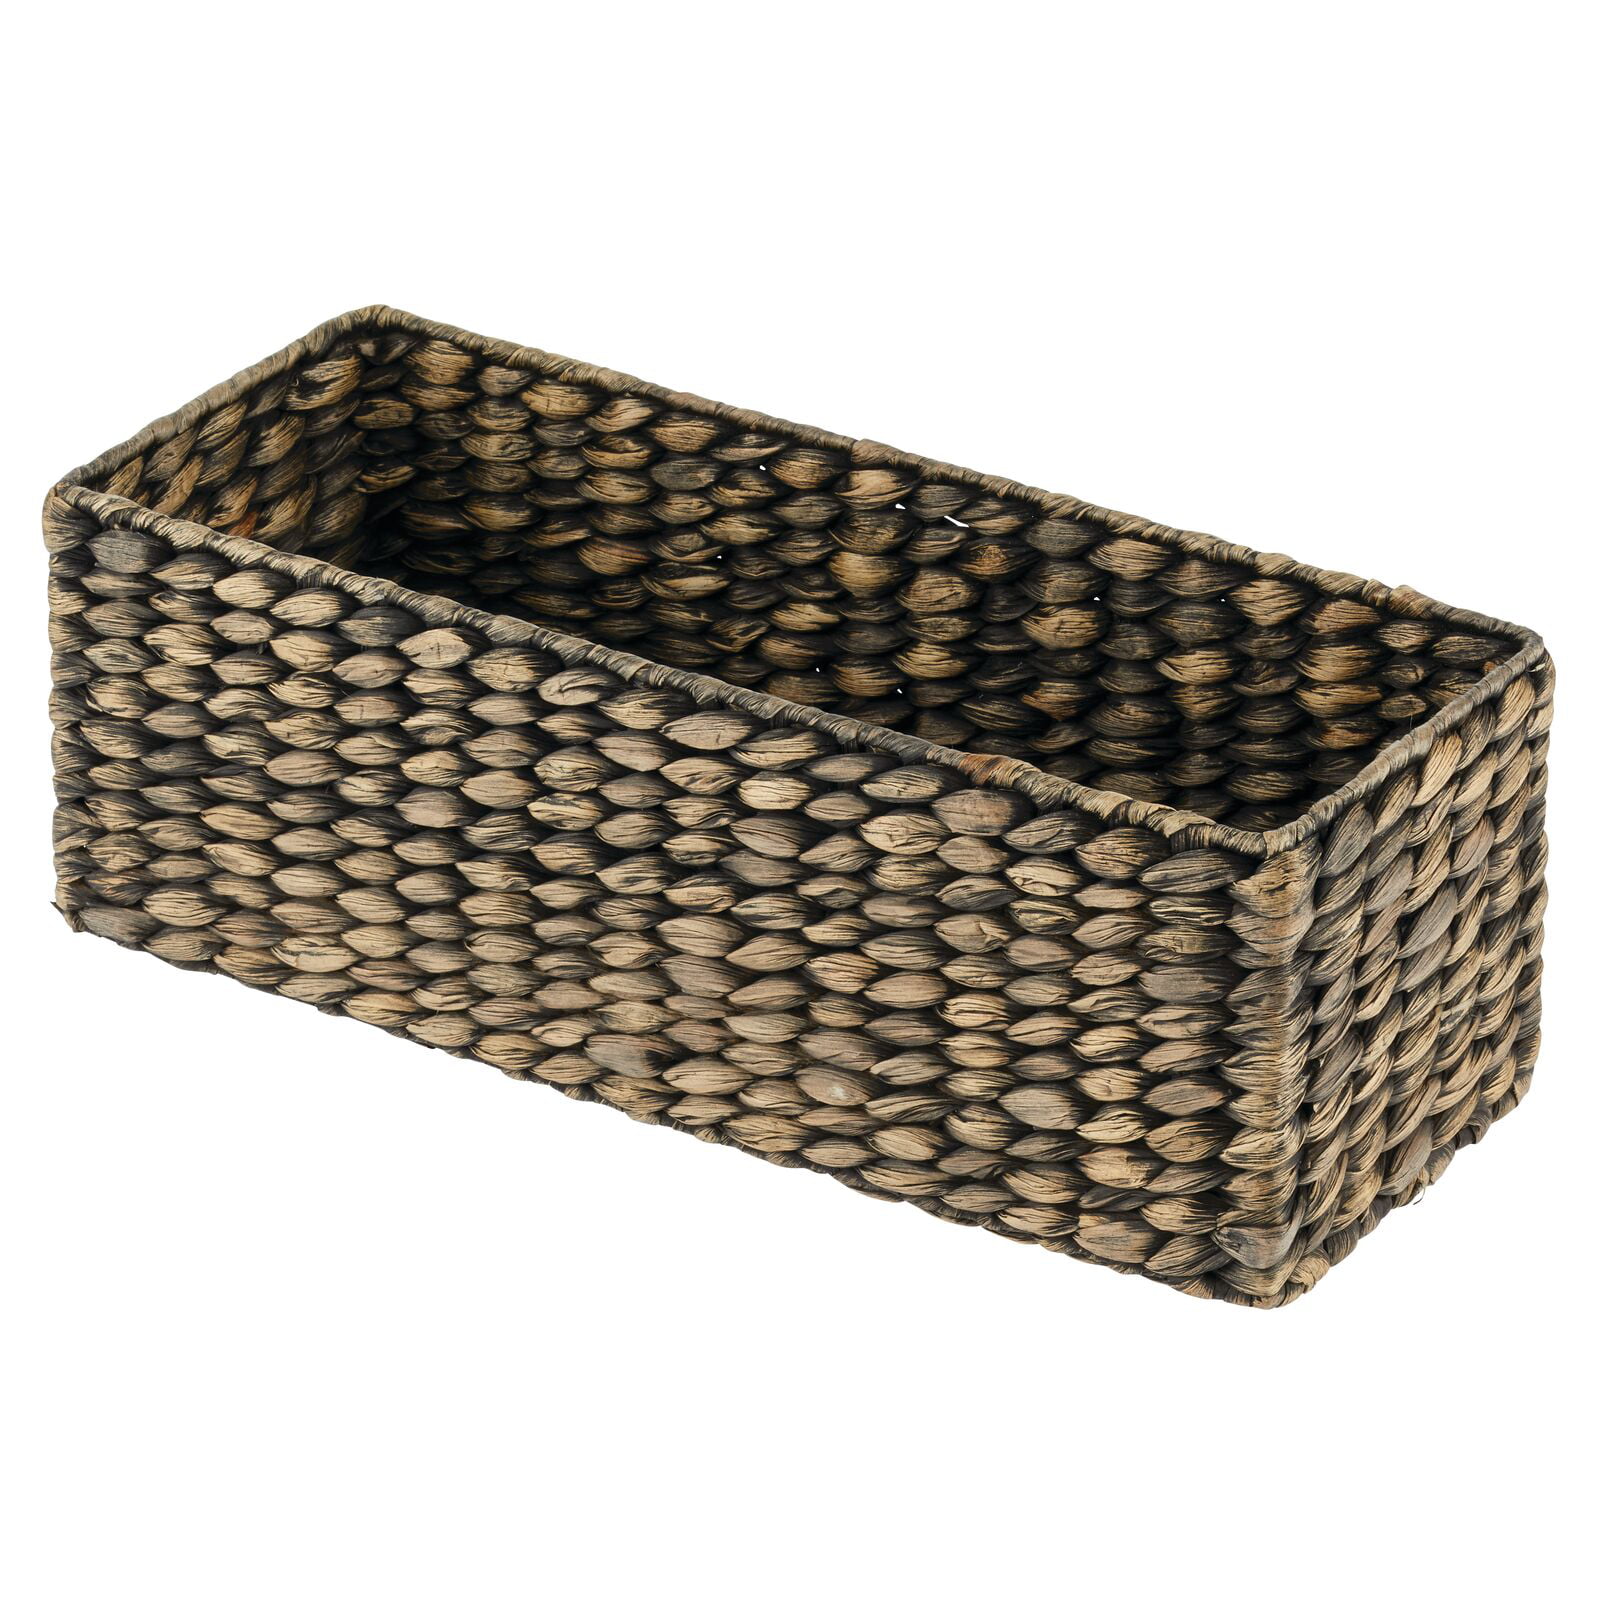 Amish Handcrafted Country Rustic Condiment Carrier Basket 